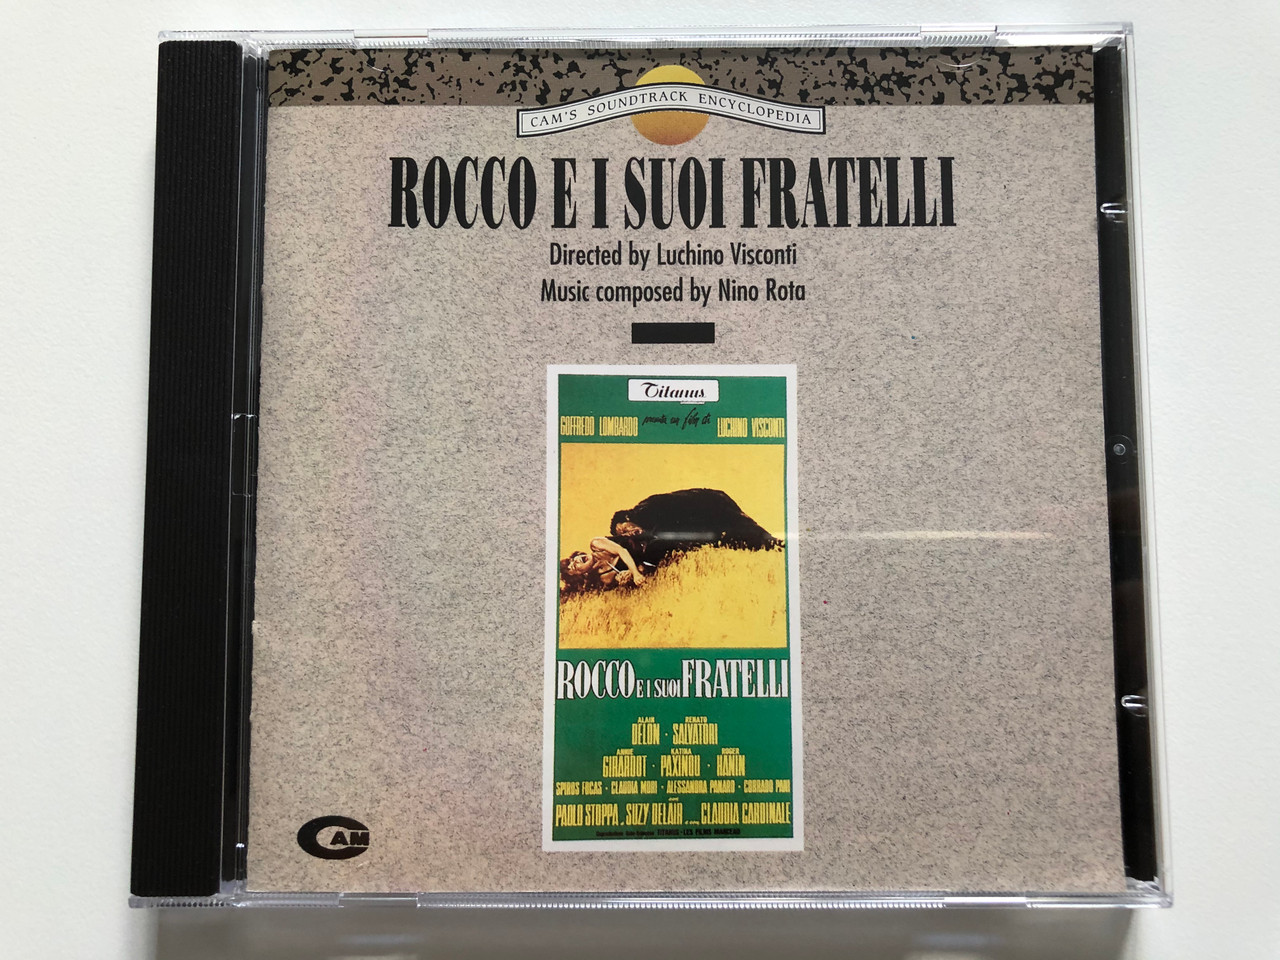 https://cdn10.bigcommerce.com/s-62bdpkt7pb/products/30518/images/180370/Rocco_E_I_Suoi_Fratelli_Directed_by_Luchino_Visconti_Music_composed_by_Nino_Rota_Cams_Soundtrack_Encyclopedia_CAM_Audio_CD_1991_Stereo_CSE_014_1__00897.1623089660.1280.1280.JPG?c=2&_ga=2.149439920.700277554.1623167661-252145610.1623167661